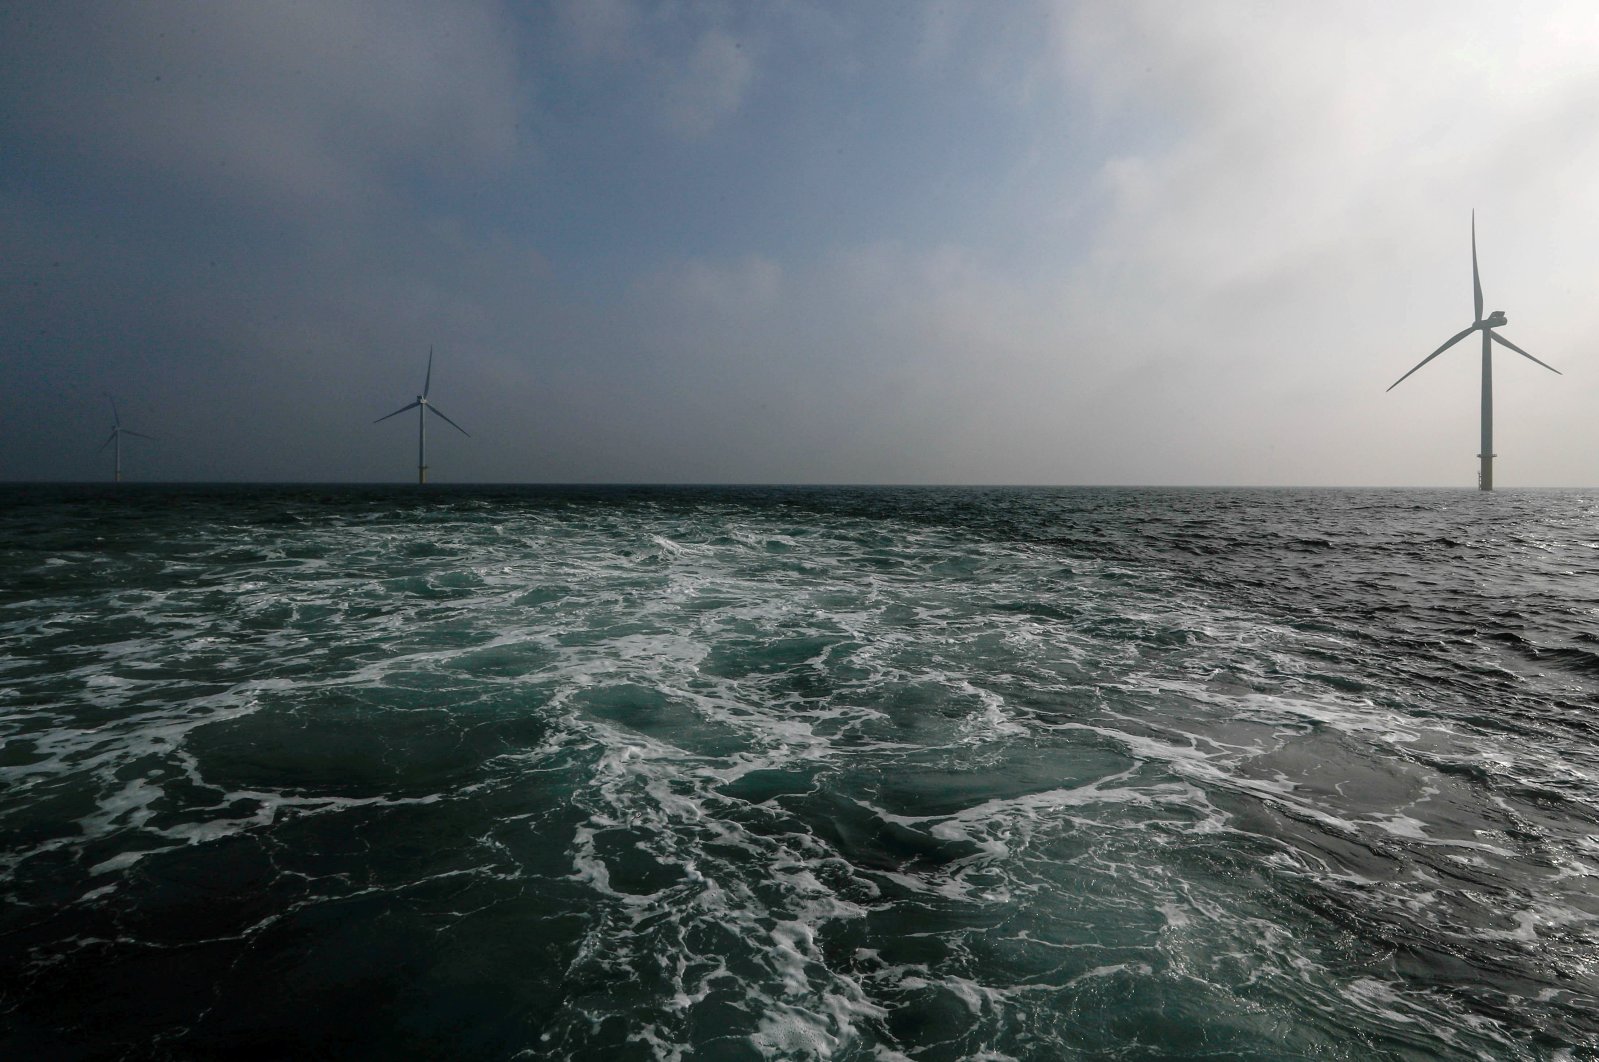 Power-generating windmill turbines are seen at the Eneco Luchterduinen offshore wind farm near Amsterdam, Netherlands, Sept. 26, 2017. (Reuters Photo)